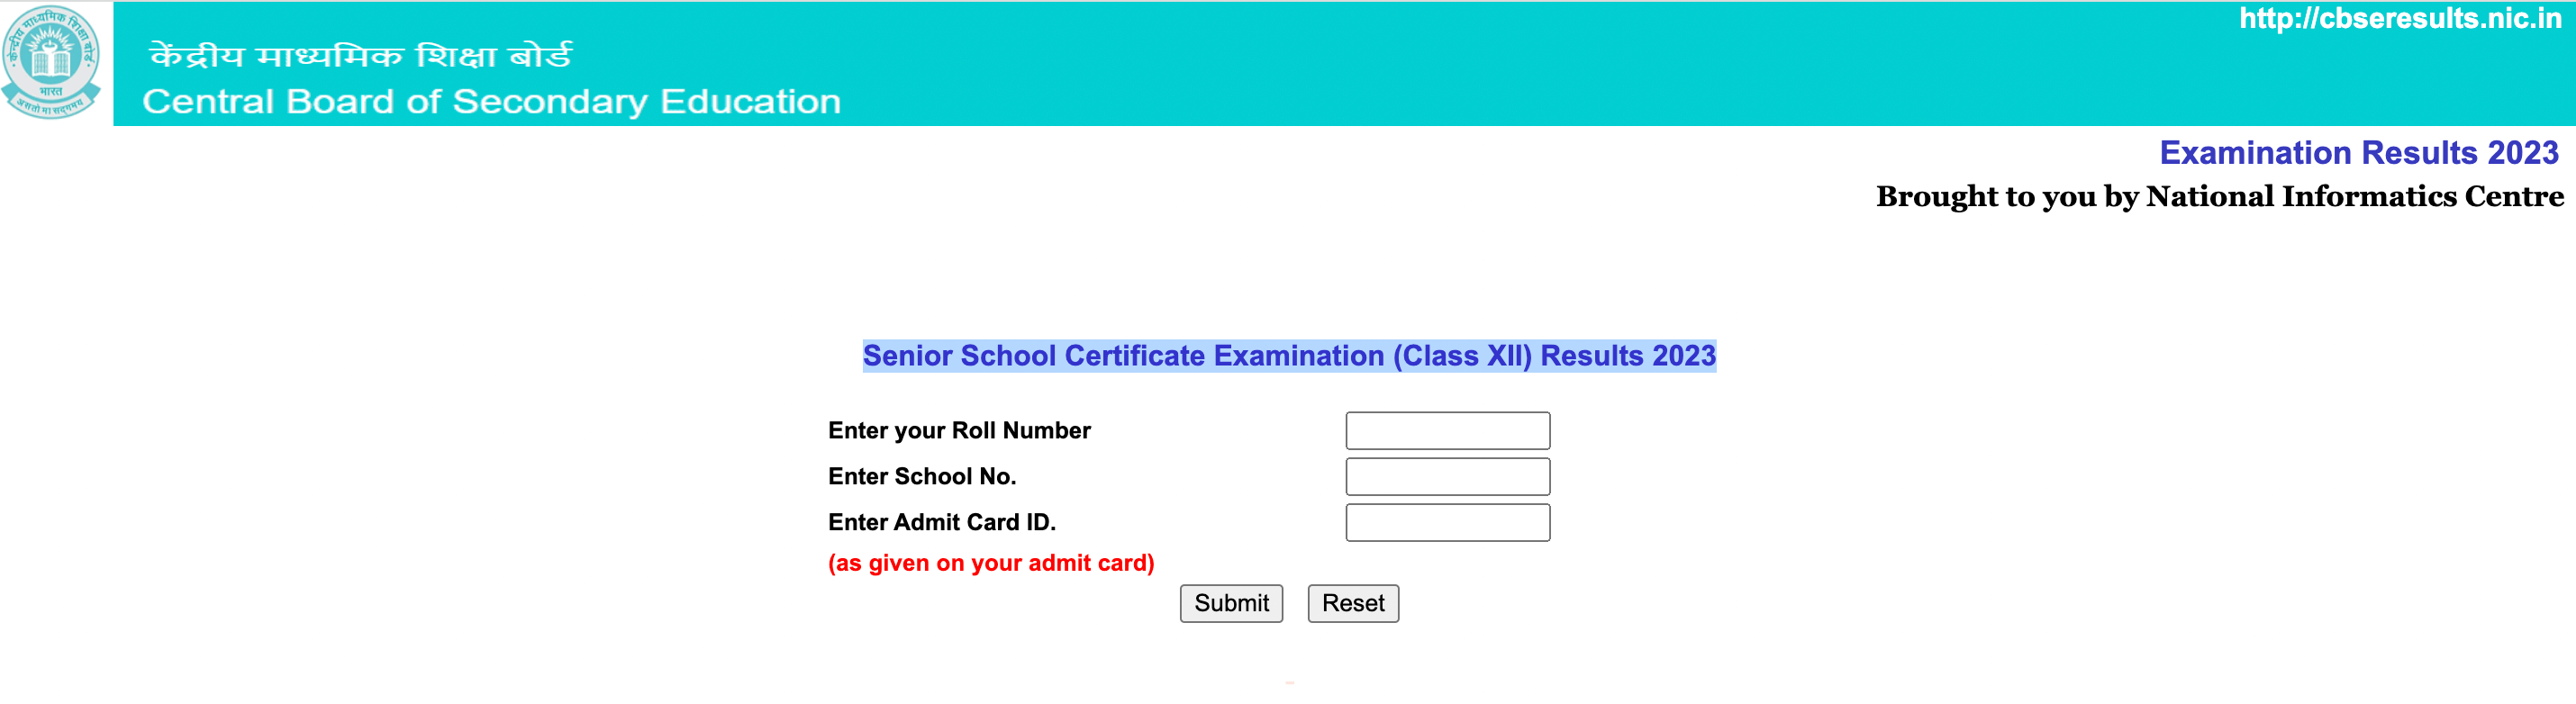 CBSE 12th Result 2023 Out, Check CBSE Class 12th Result_5.1